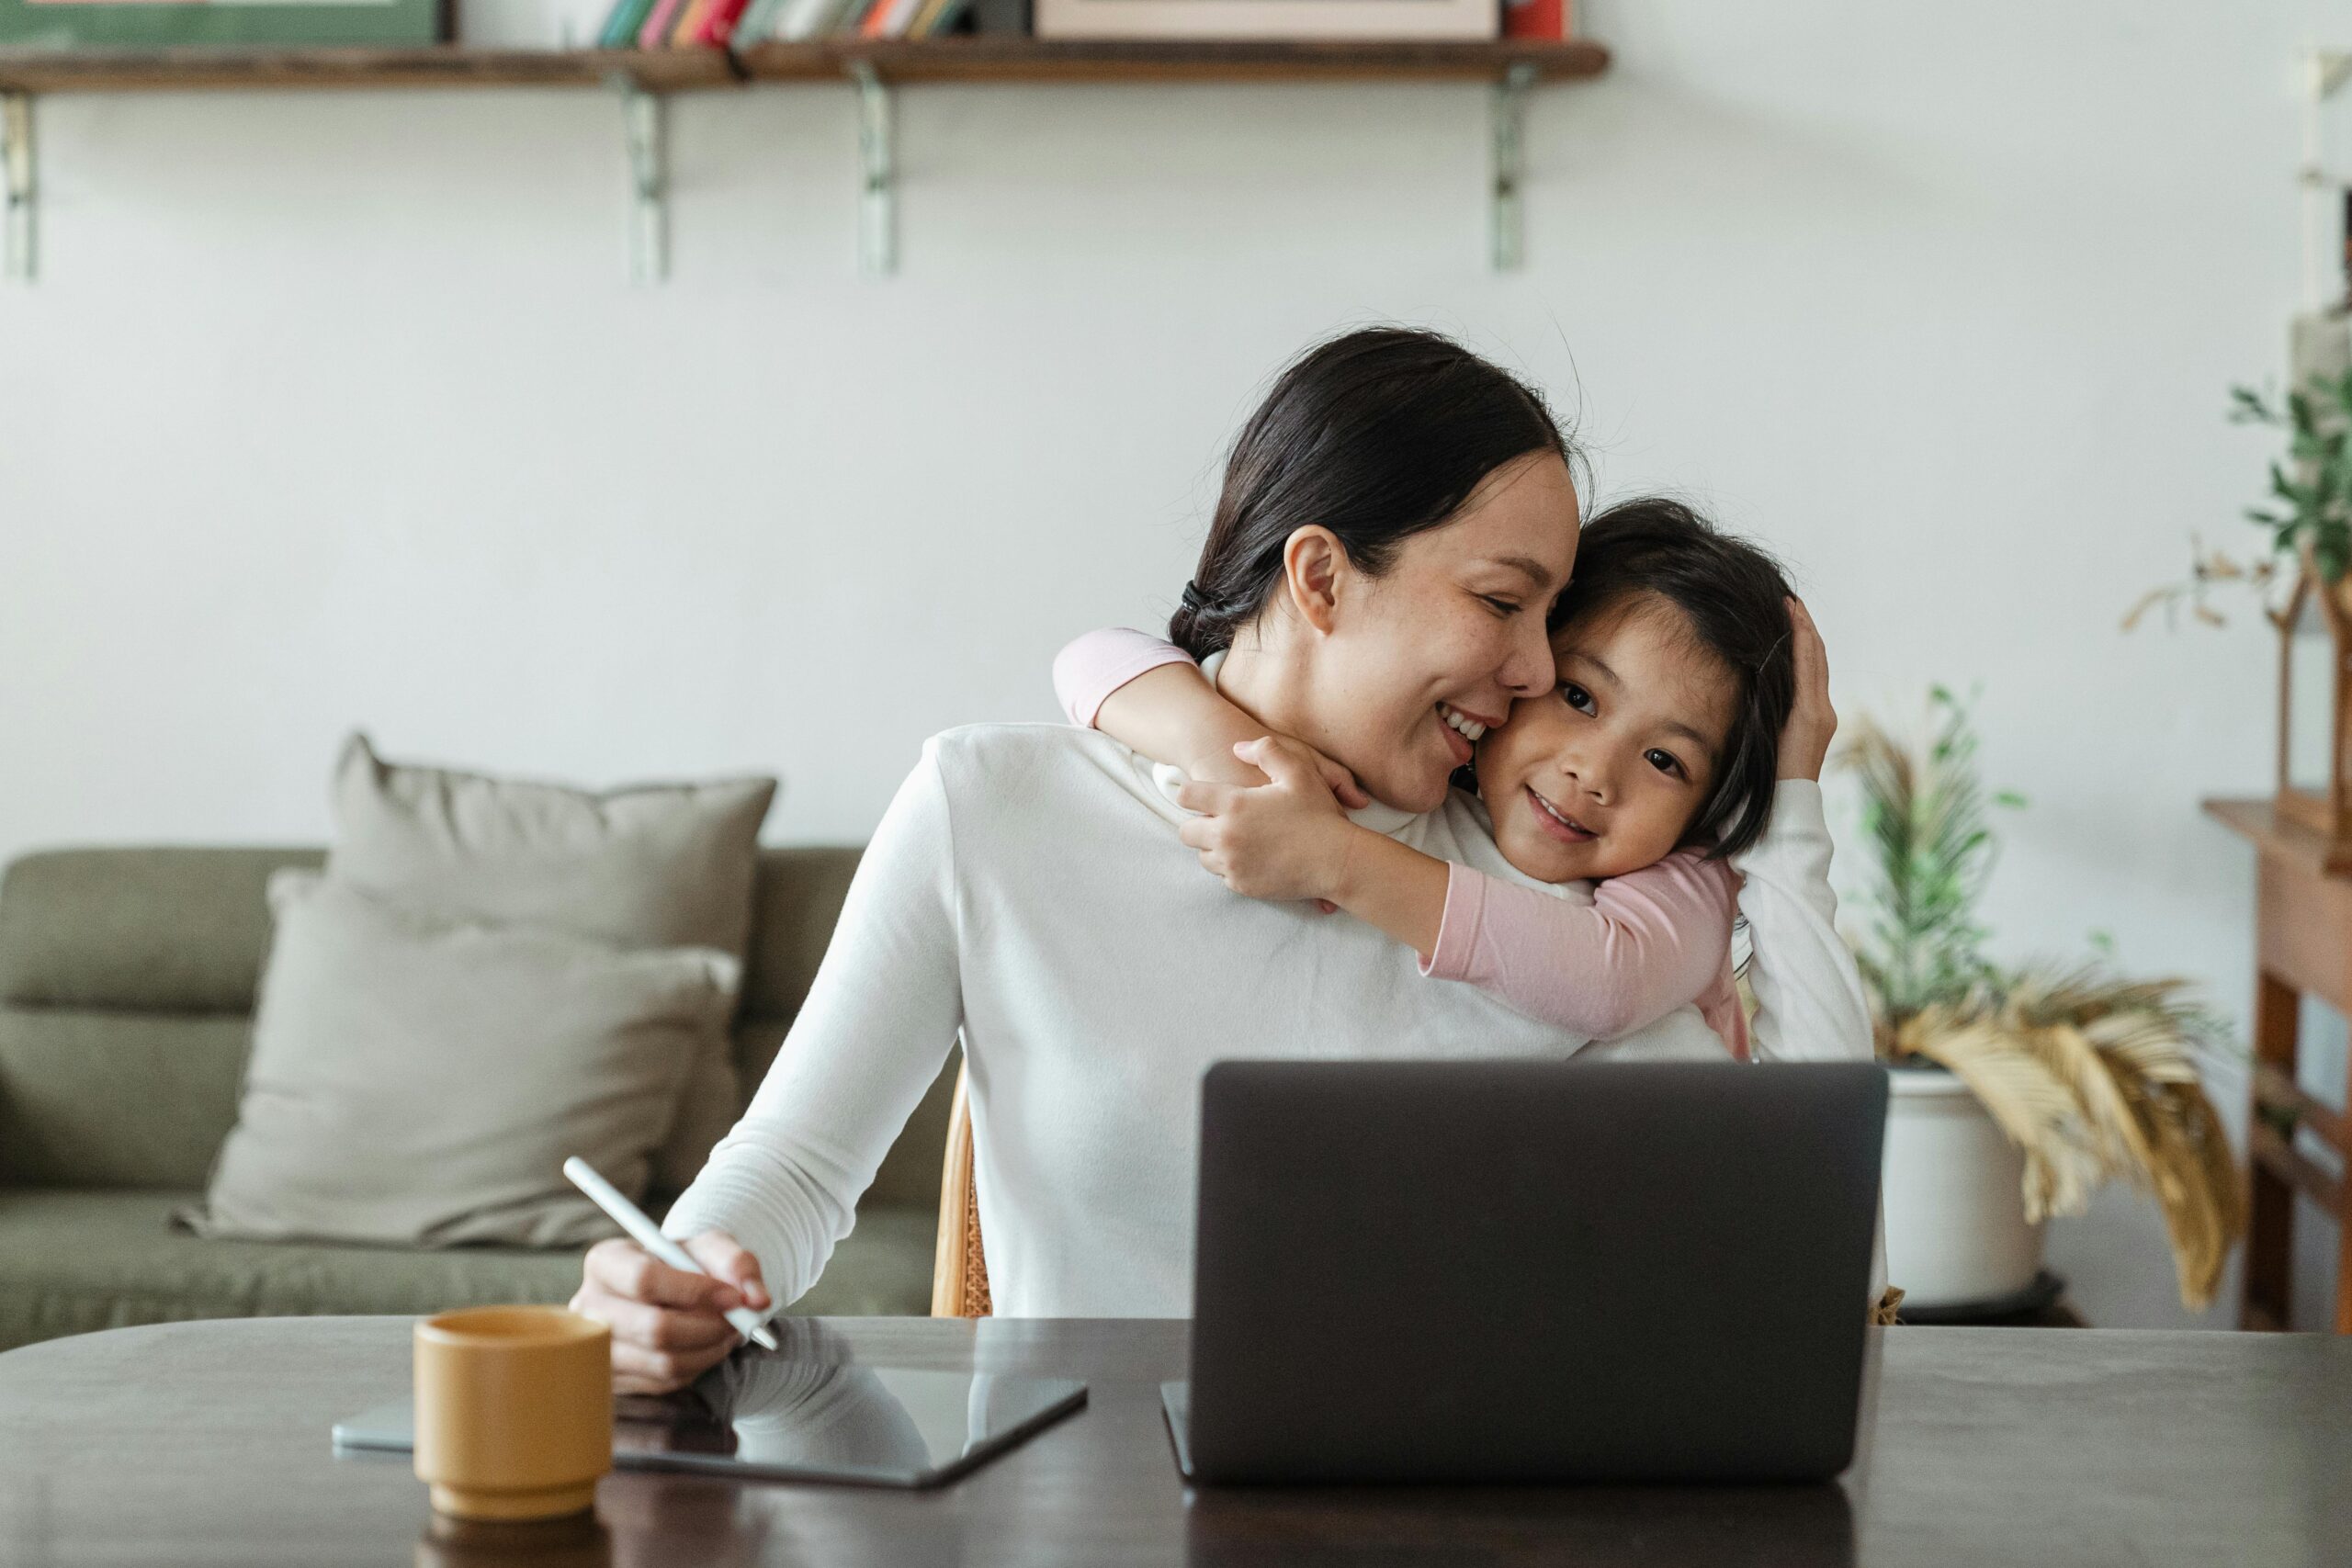 Mom in white shirt and dark hair with laptop and tablet in front of her, half embracing young child who is hugging her neck